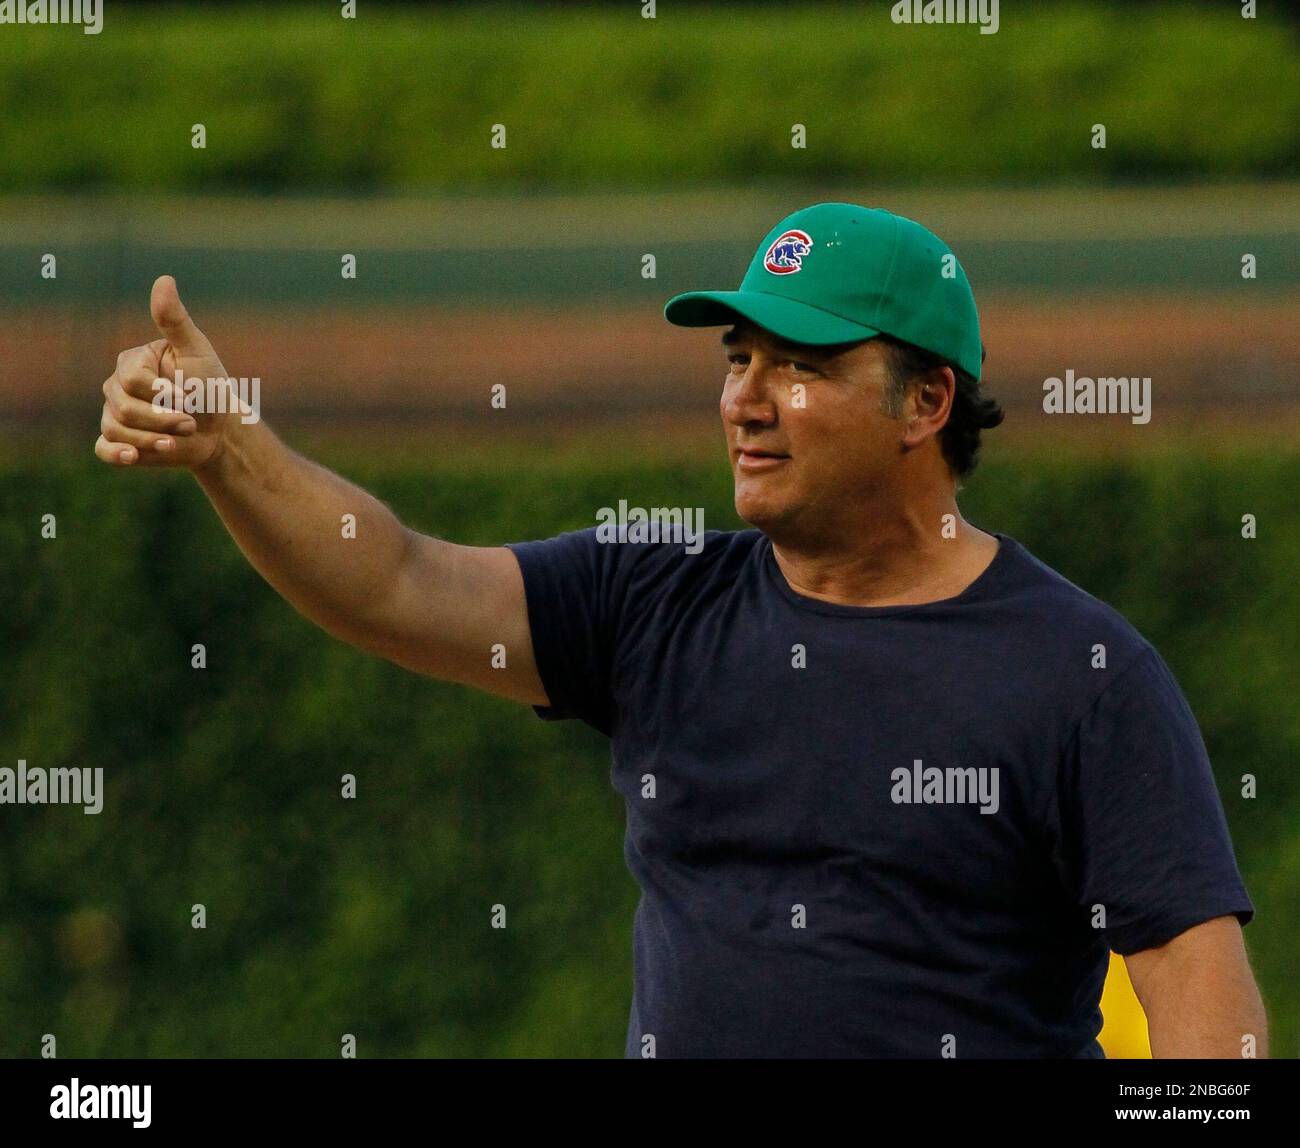 Actor Jim Belushi salutes the crowd after throwing out a ceremonial first pitch at baseball game between the Chicago Cubs and the Philadelphia Phillies Monday, July 18, 2011 in Chicago. (AP Photo/Charles Rex Arbogast) Stock Photo